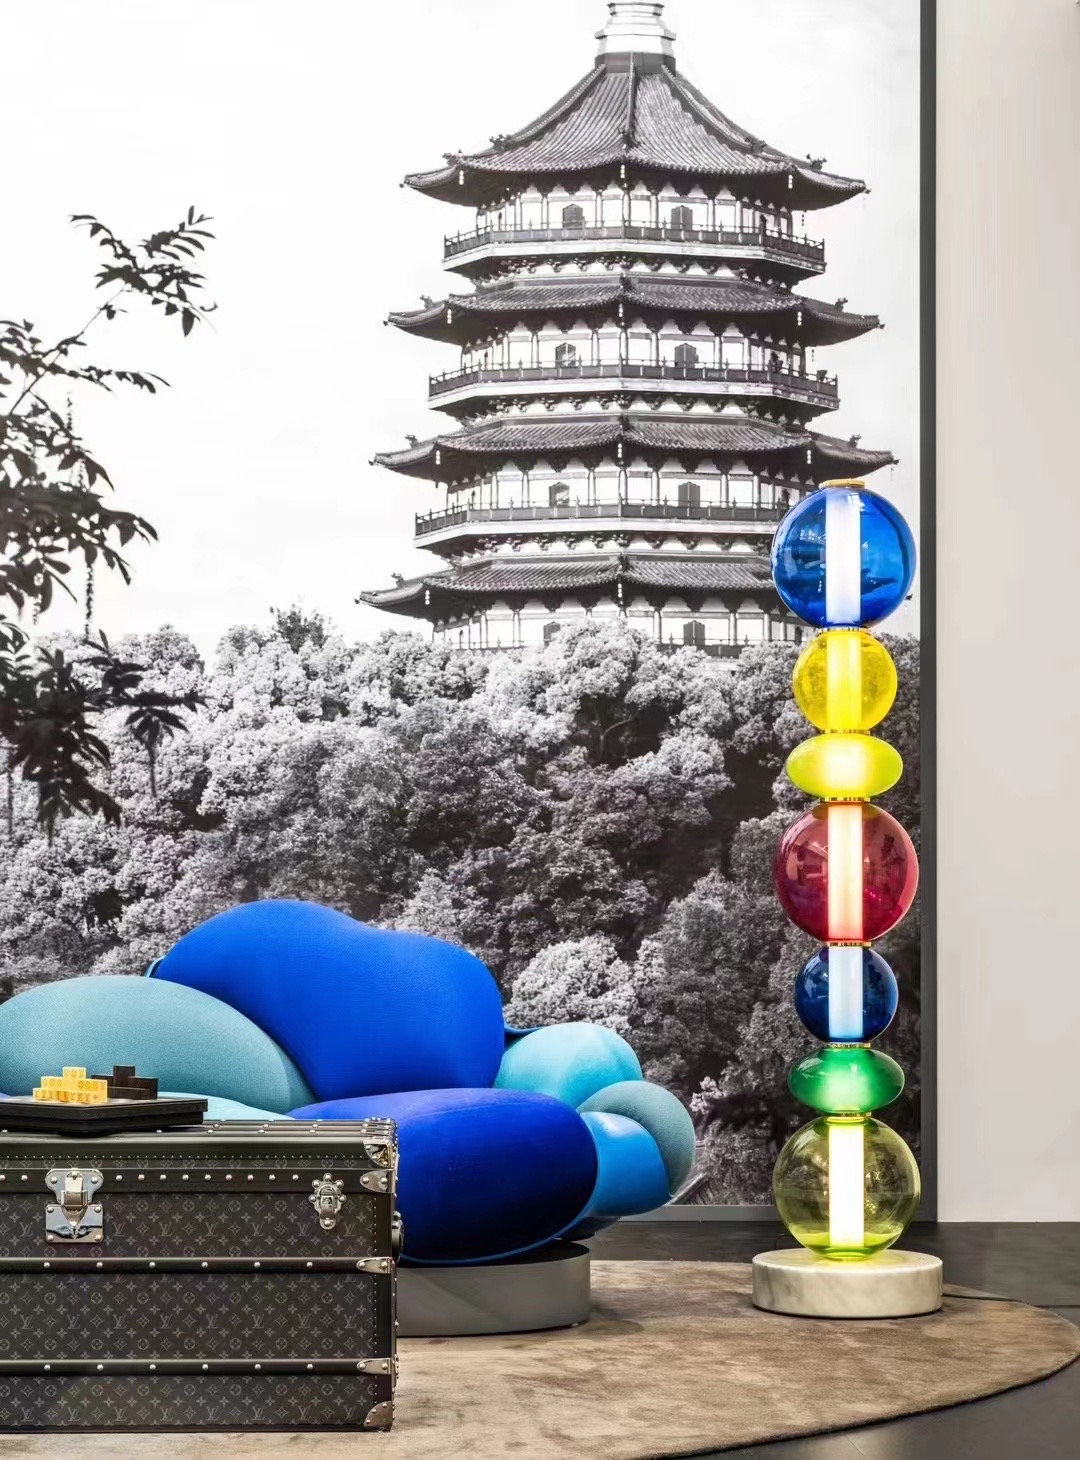 Louis Vuitton Hardsided Objects Nomades Trunk Exhibition Mar 22-26 2023 Beijing